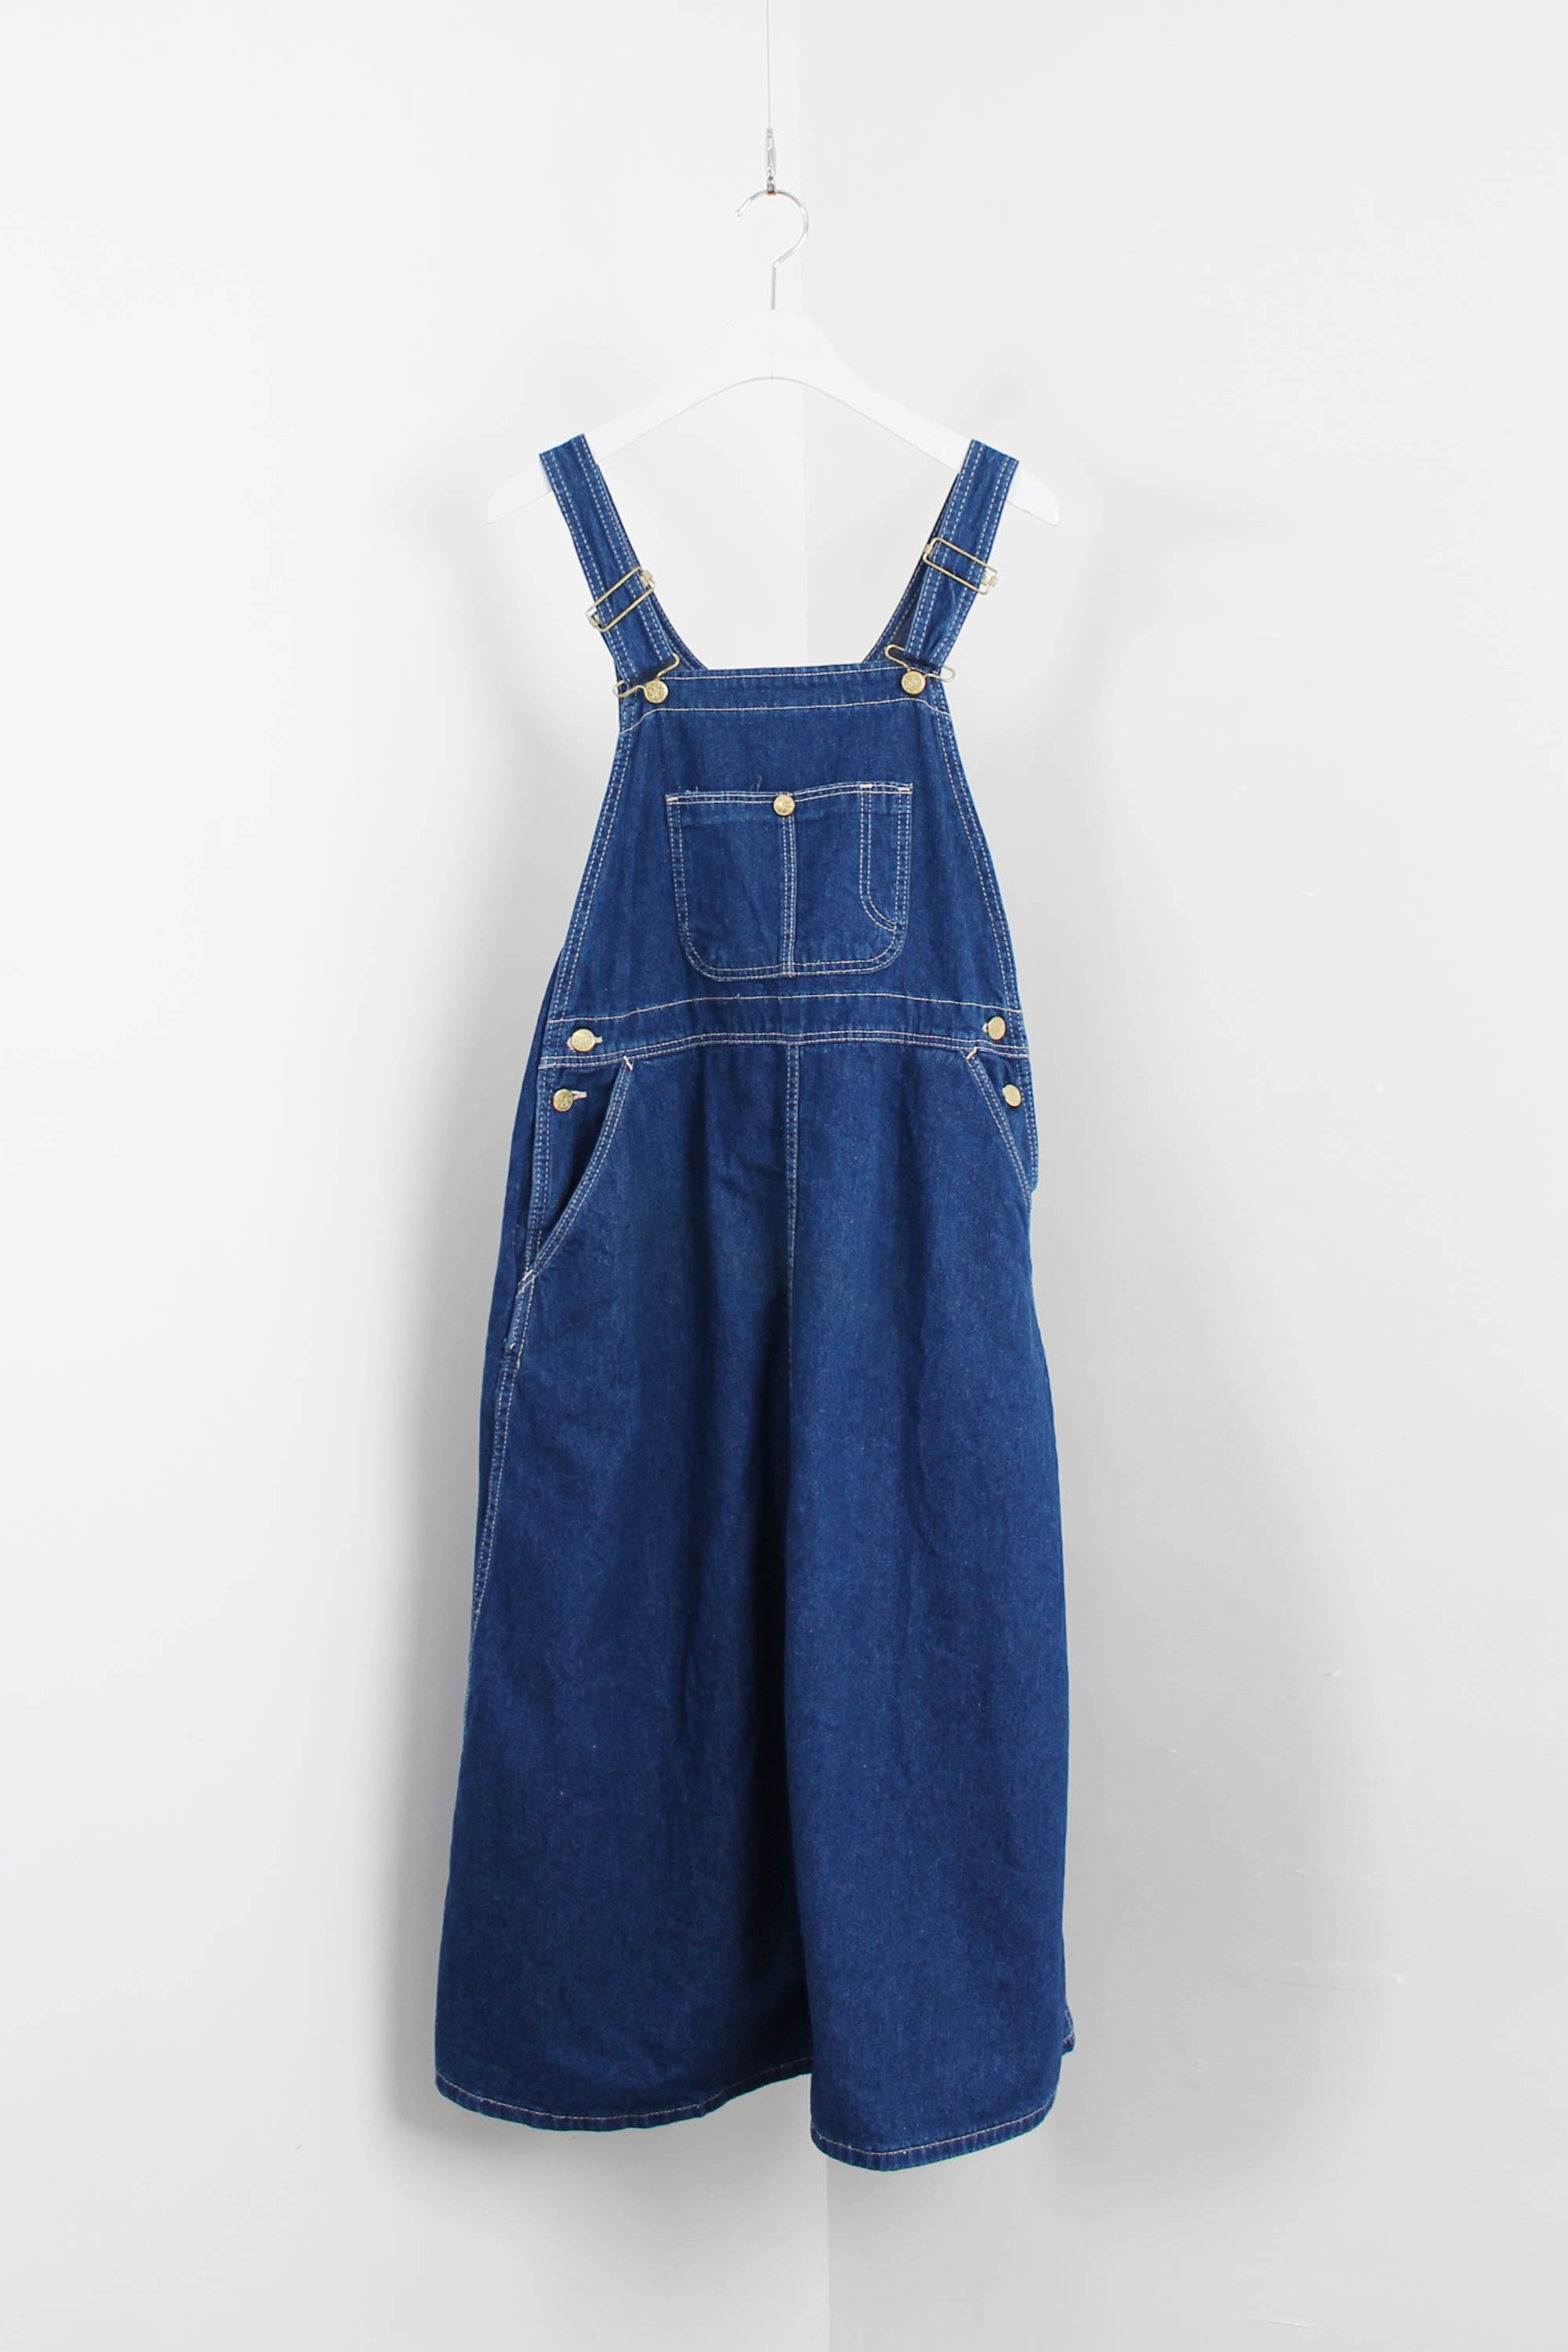 pointer brand overall